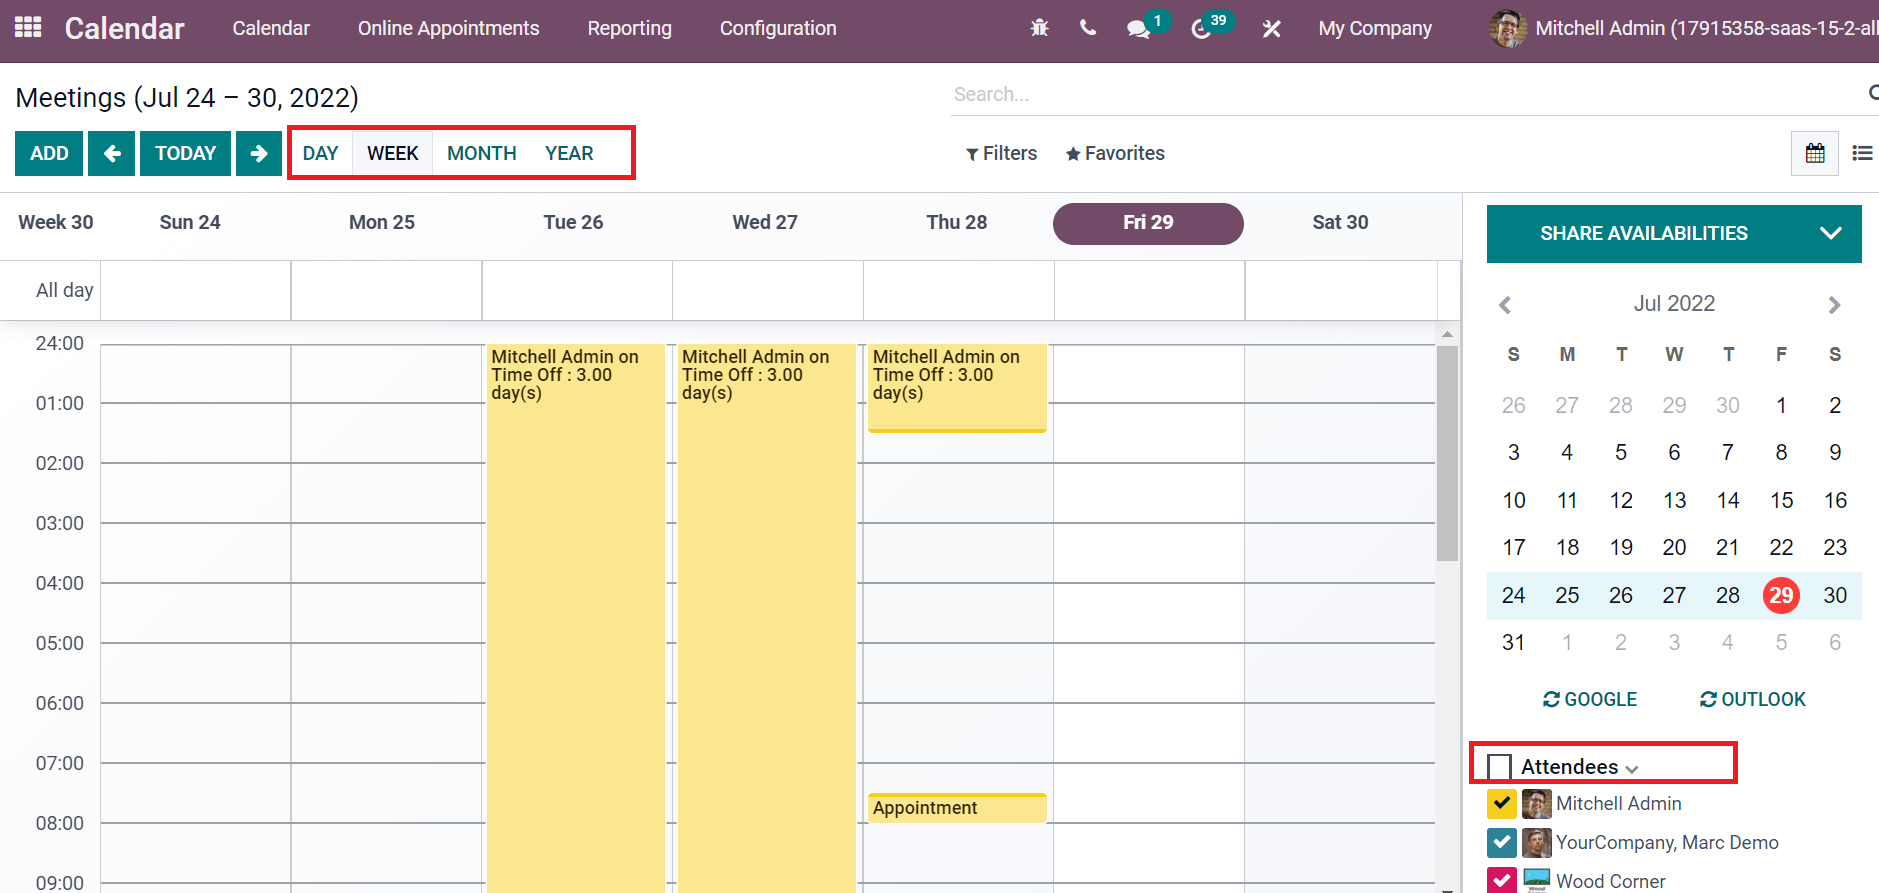 odoo-15-calendar-to-manage-appointments-events-in-a-business-cybrosys